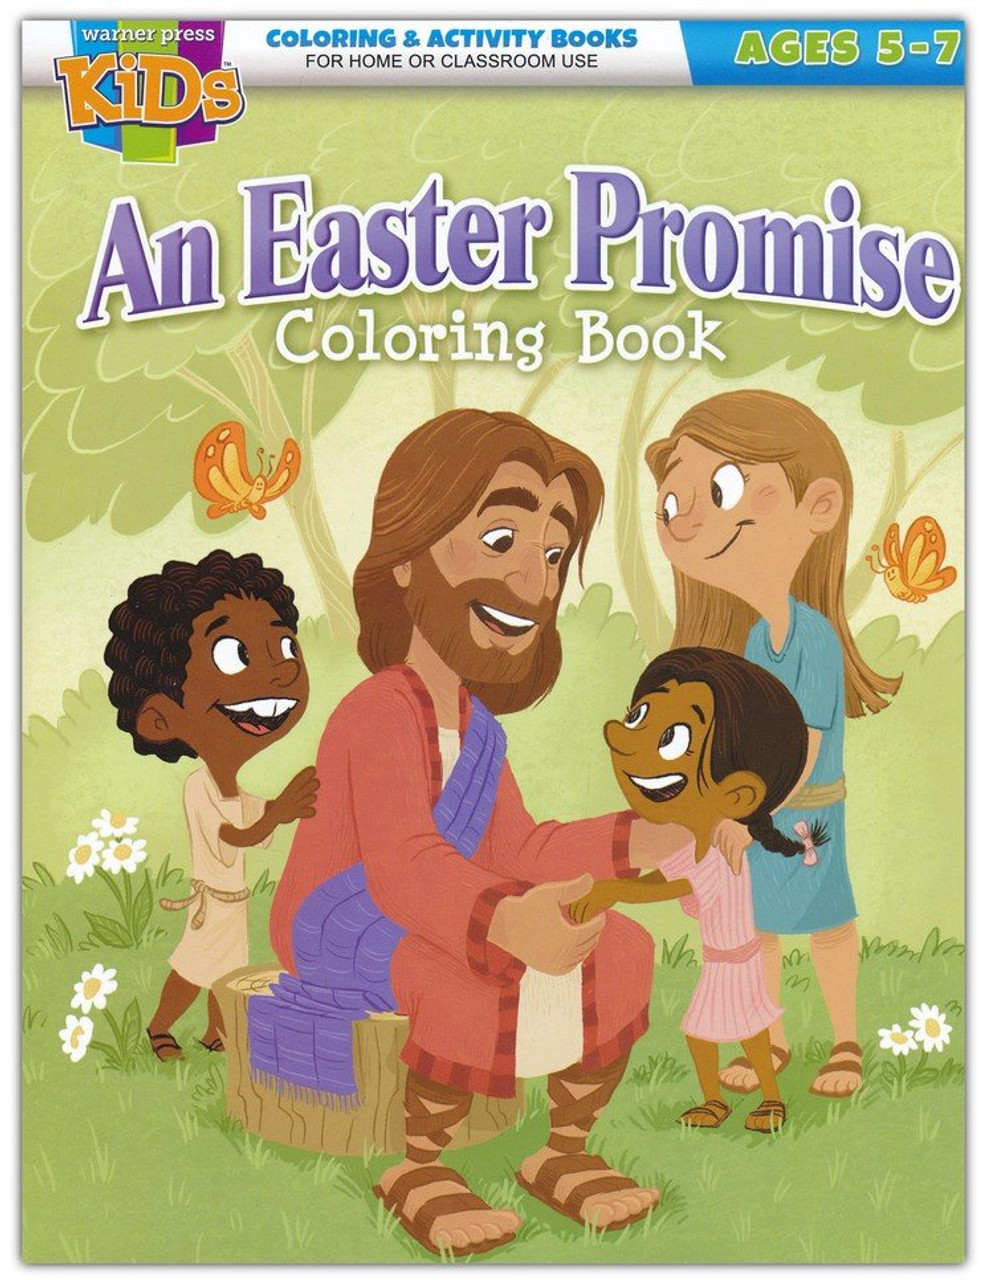 Coloring Lent: An Adult Coloring Book for the Journey to Resurrection [Book]